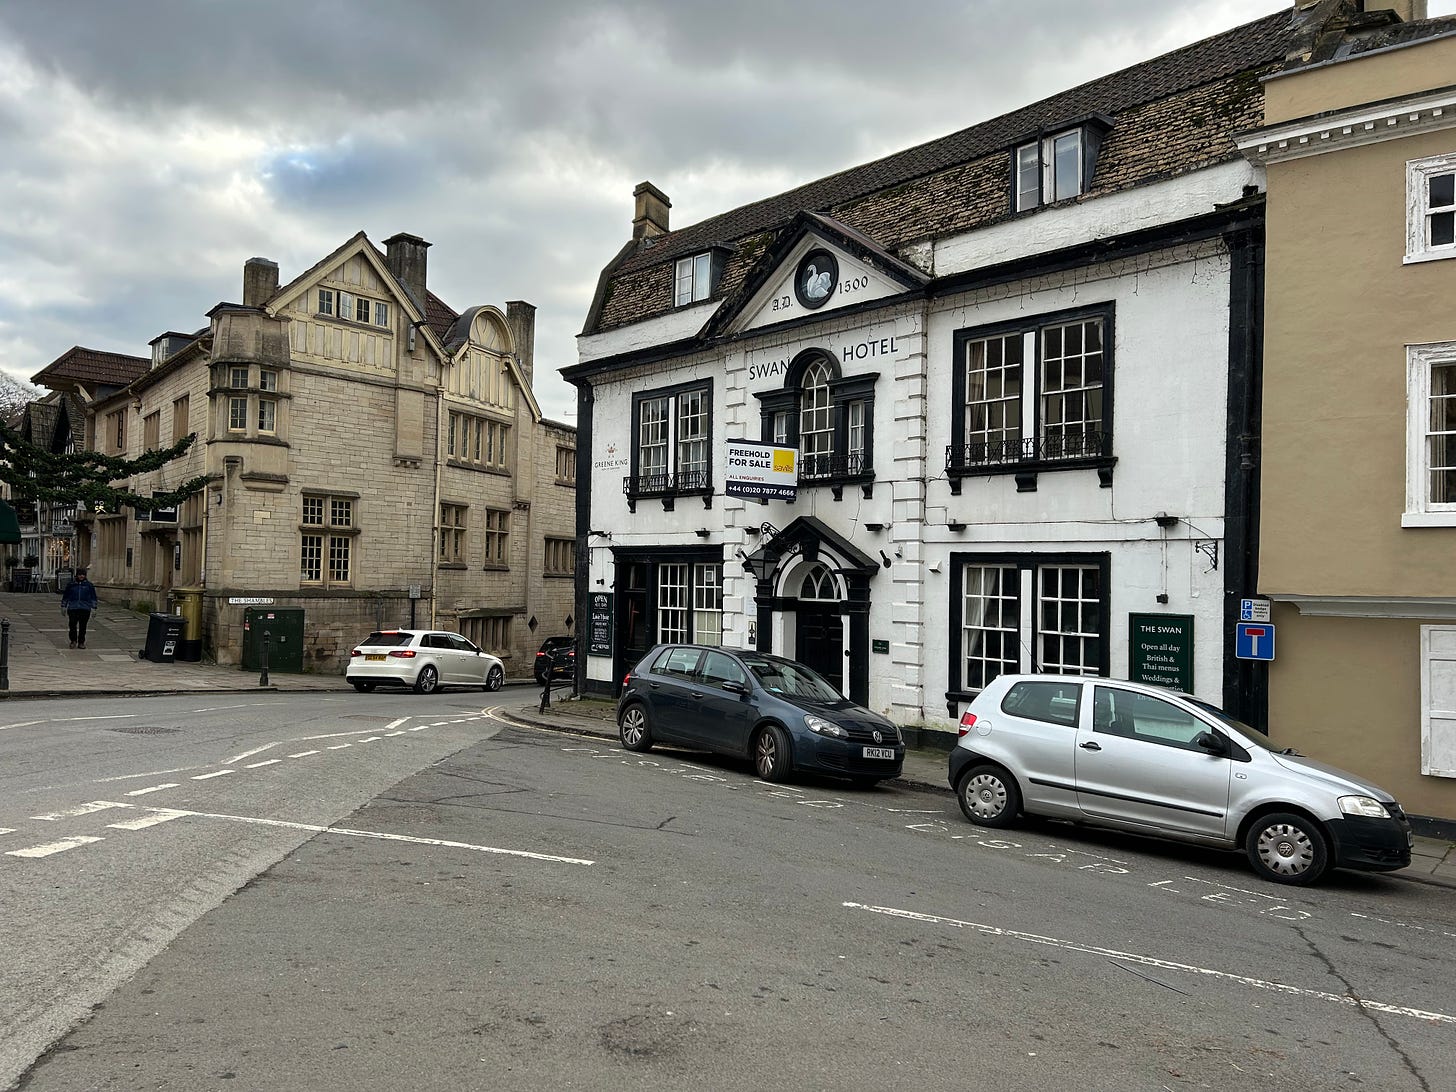 The black and white fronted Swan Hotel, Church Street, Bradford on Avon, Wiltshire. Image: Roland's Travels